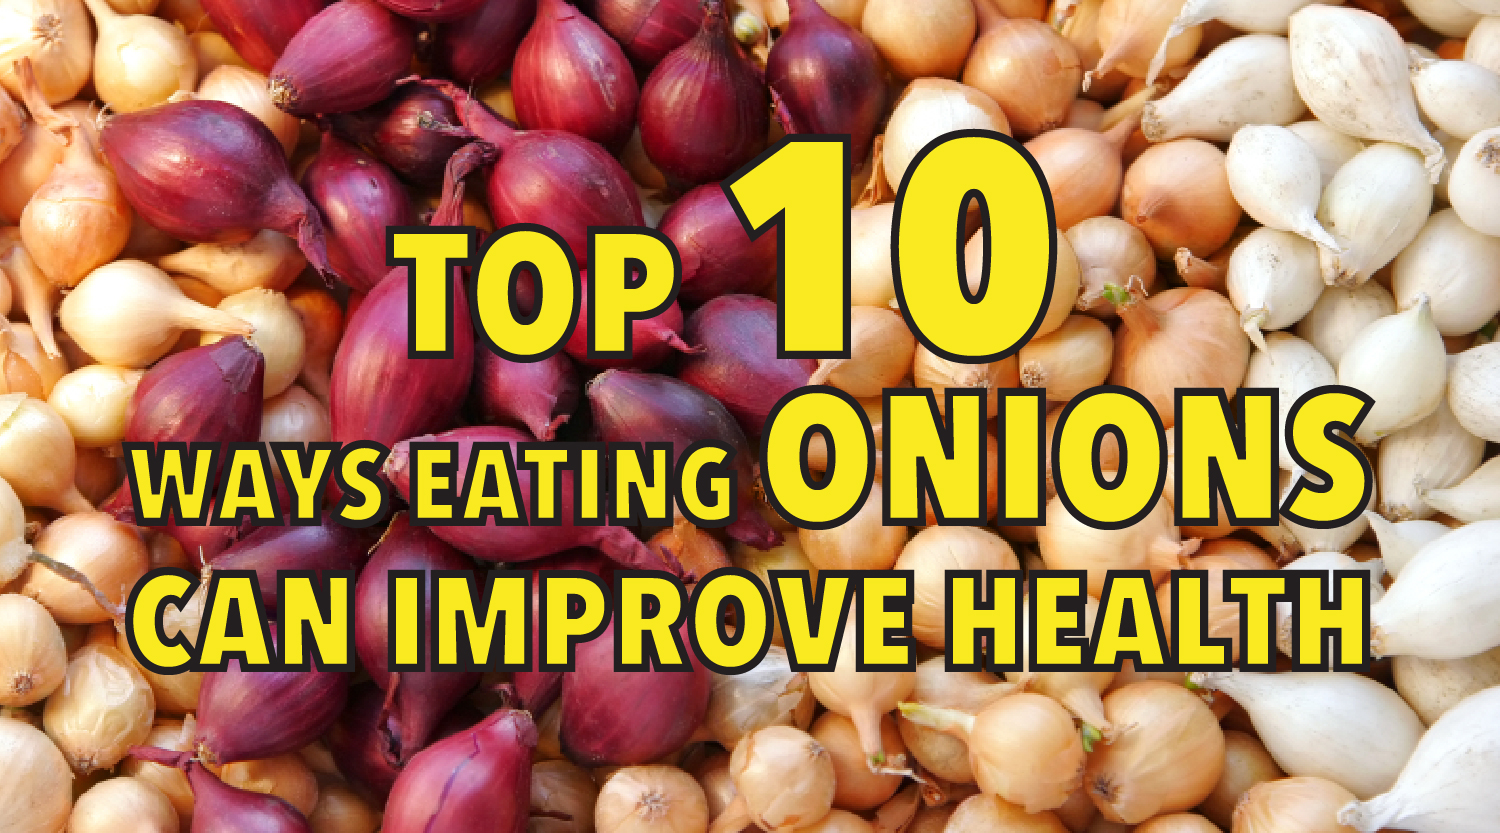 Top 10 ways eating onions can improve health-01